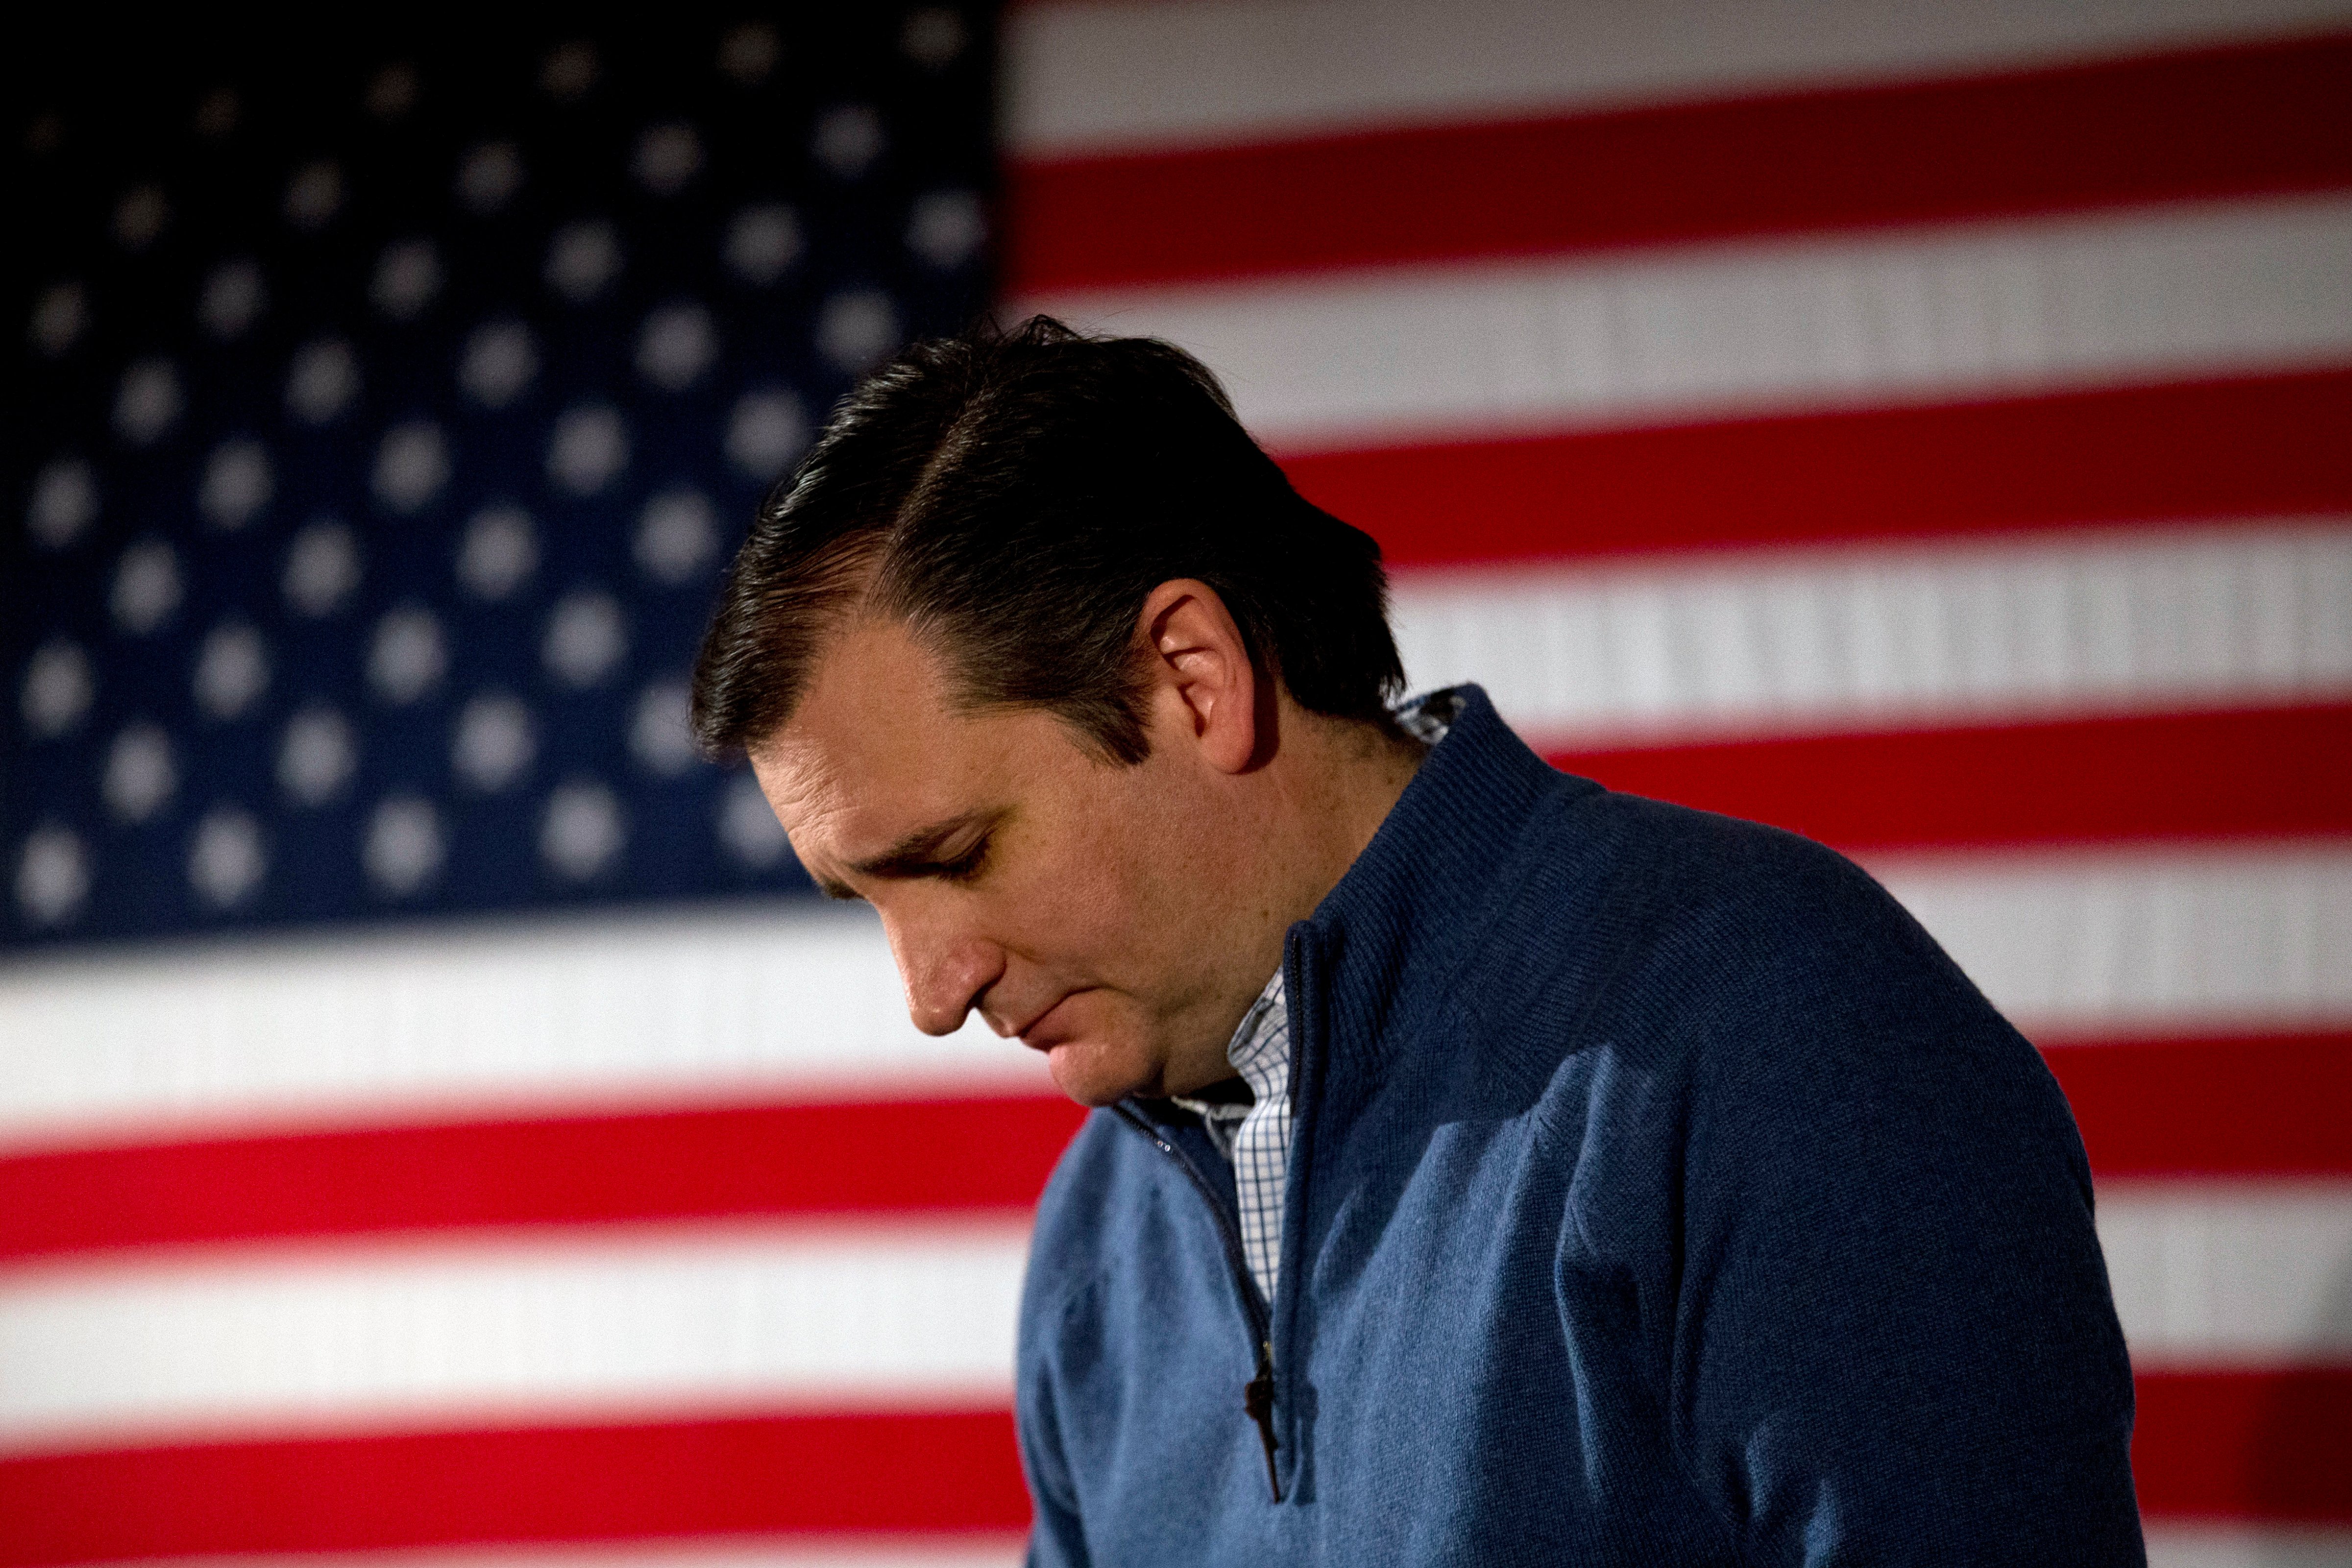 Ted Cruz listens to a question from the crowd at a campaign event in Ottumwa, IA on Jan. 26, 2016. (Jae C. Hong—AP)